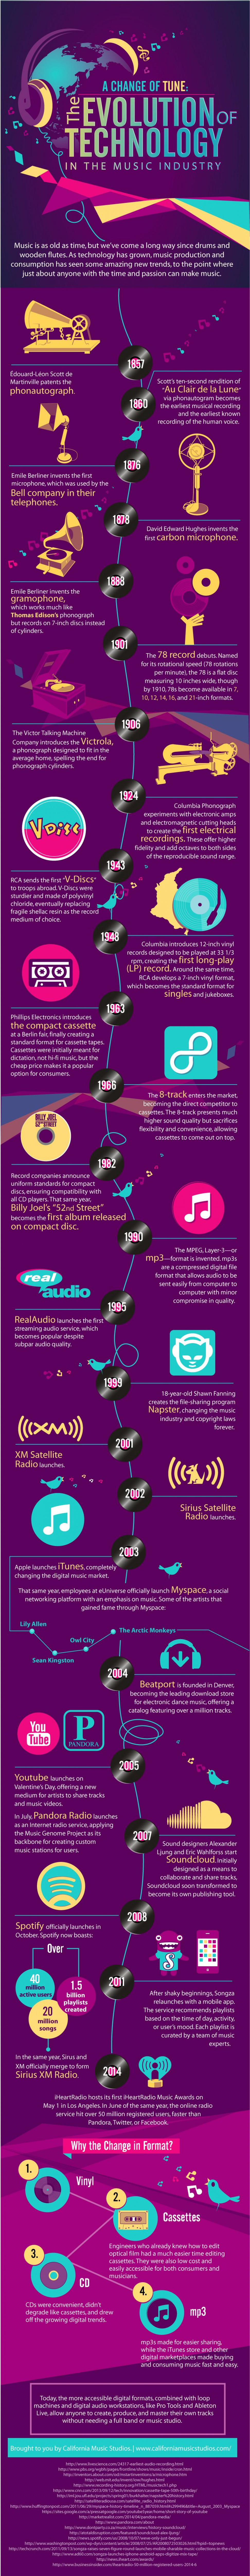 A Change of Tune: The Evolution of Technology in the Music Industry Infographic